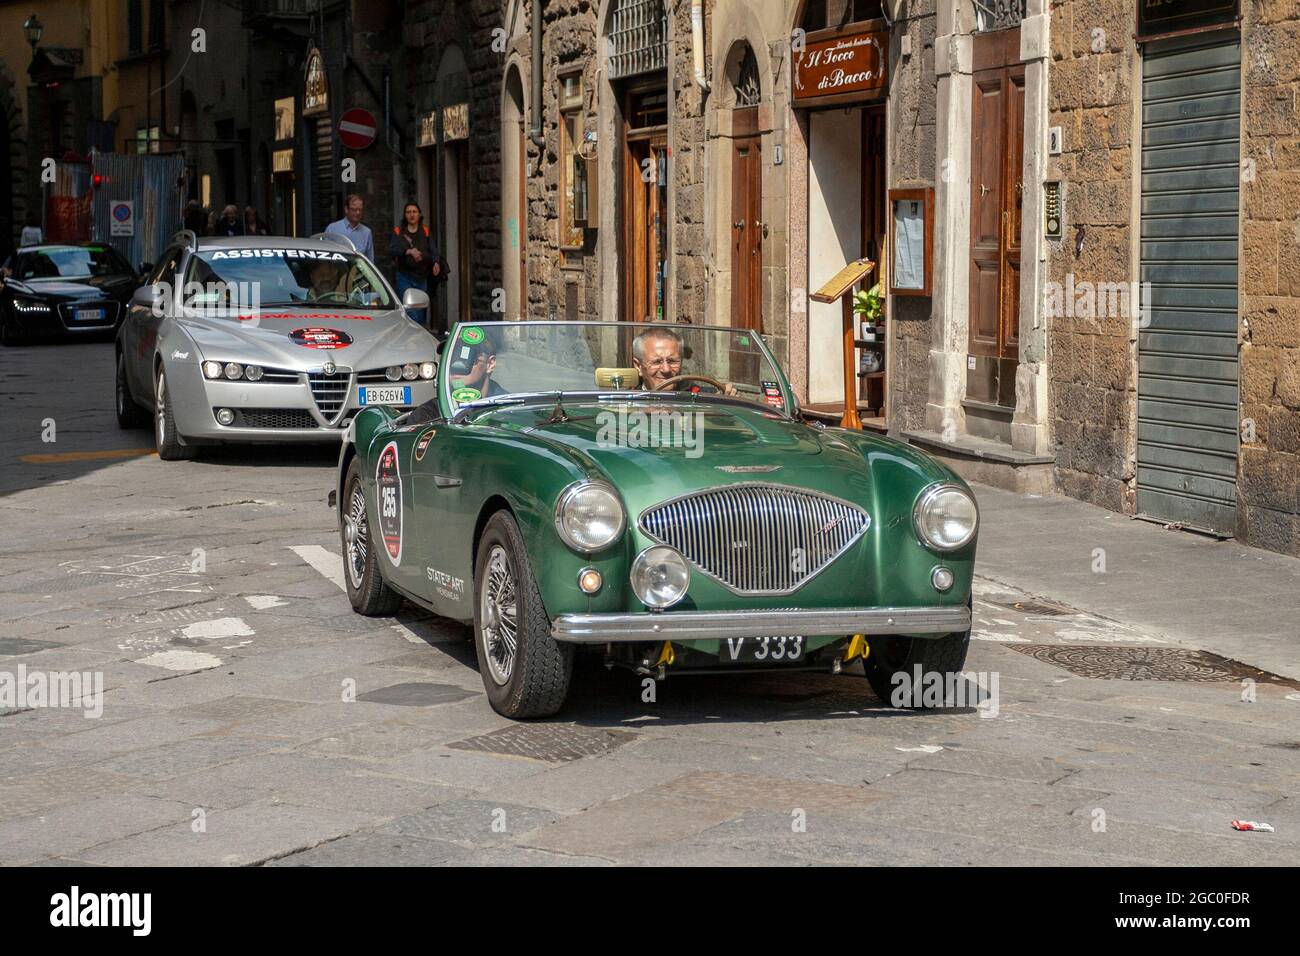 Florence, Italy - May 8, 2010: AUSTIN HEALEY 100 BN1 (1953) in the rally Mille Miglia 2010 edition on a busy street in Florence. Stock Photo